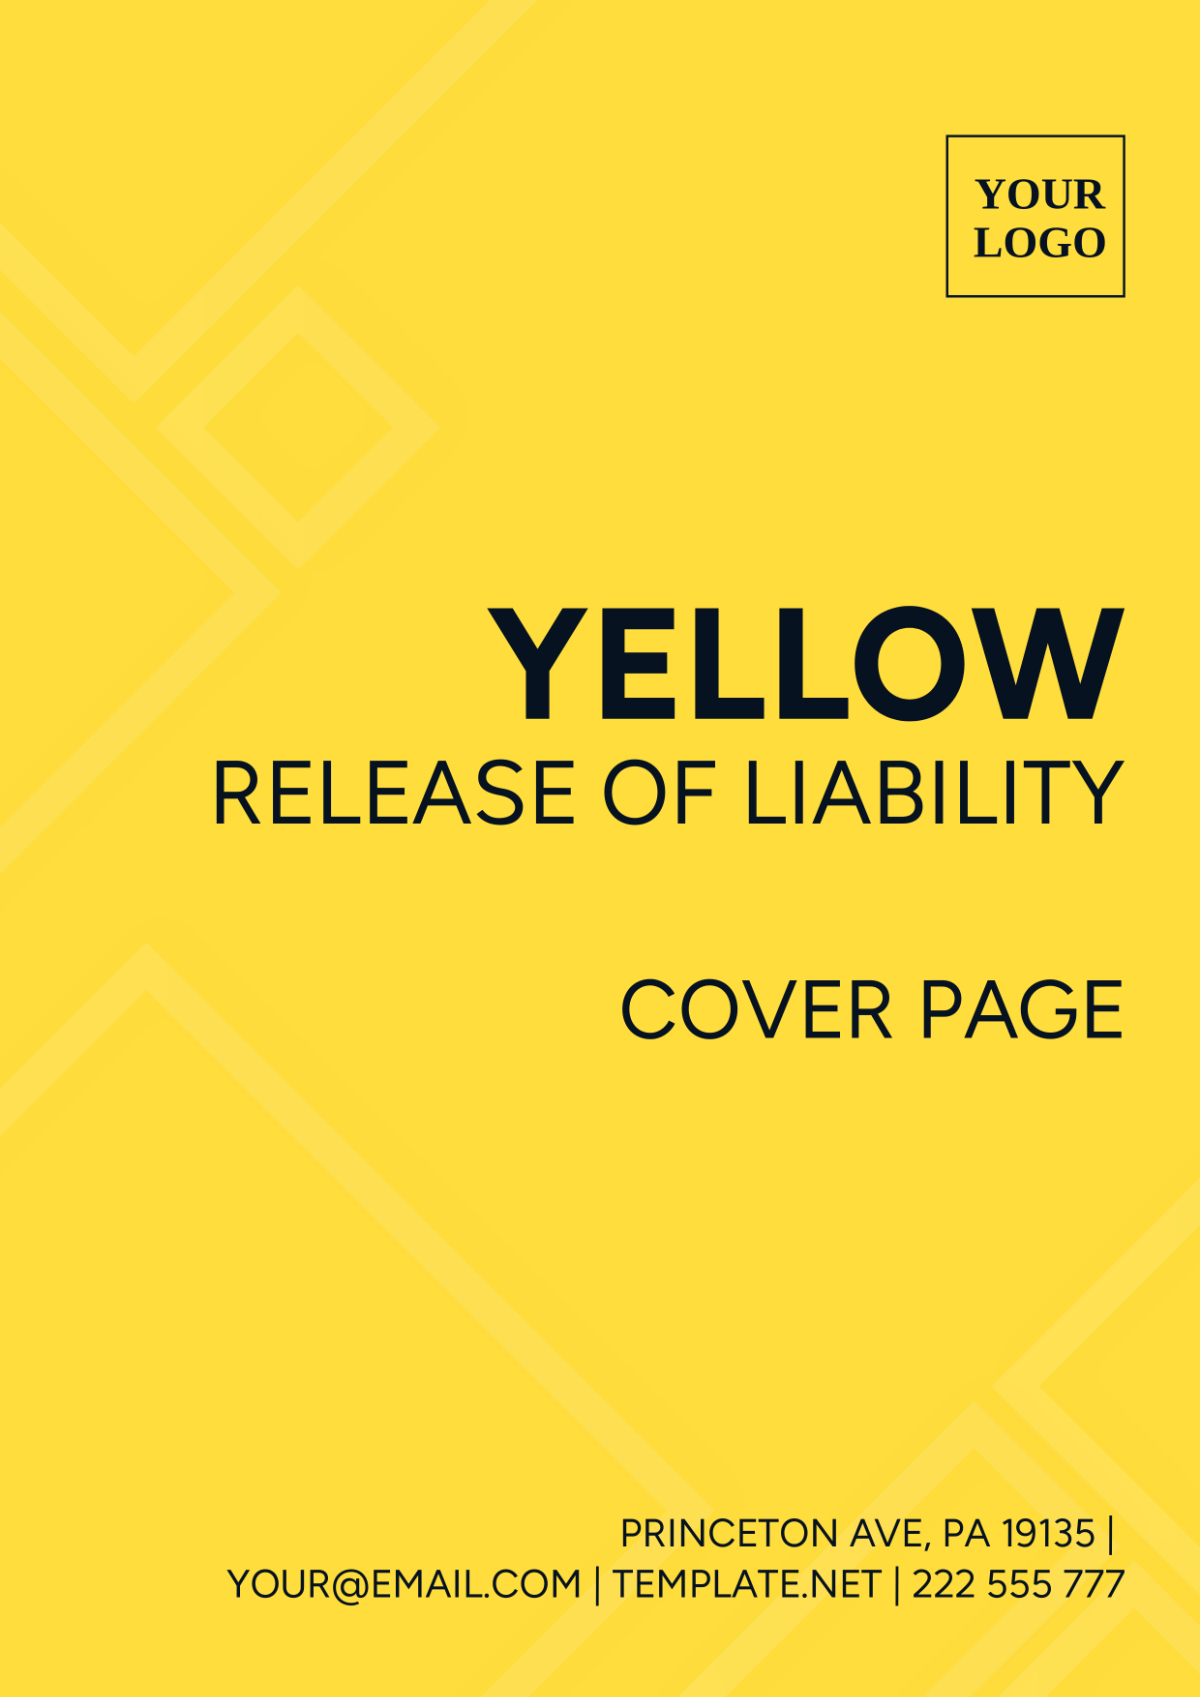 Yellow Release of Liability Cover Page